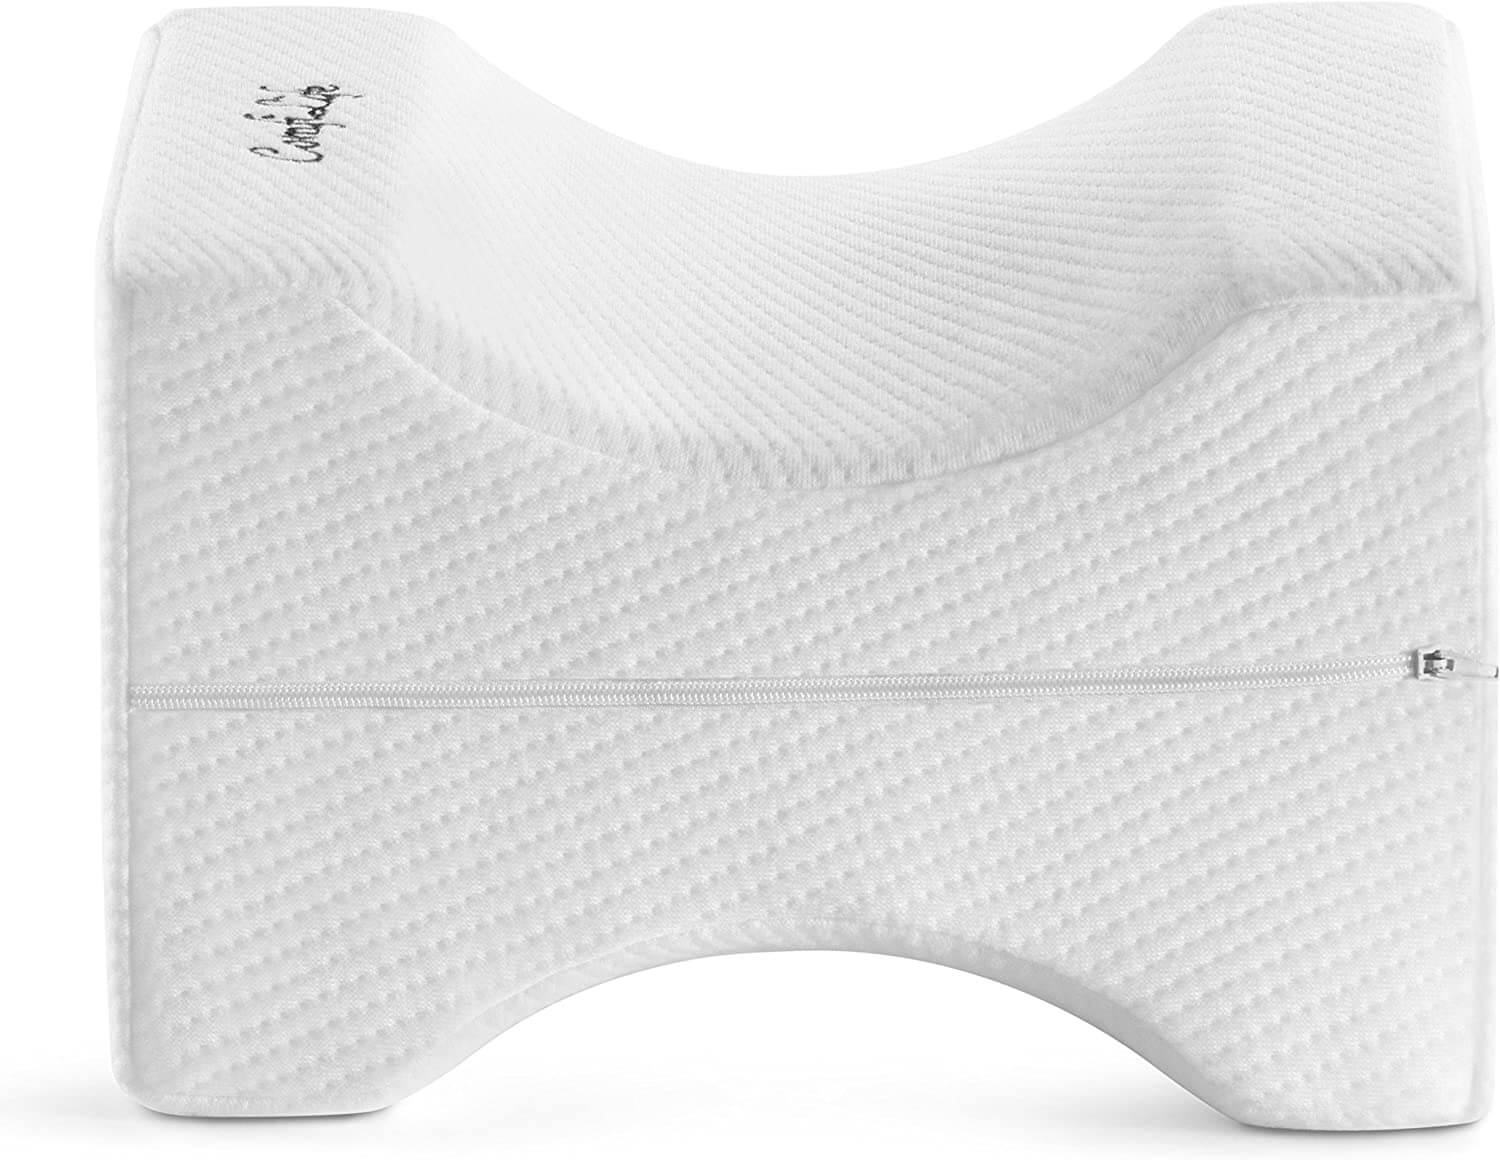 https://comfilife.com/wp-content/uploads/2021/01/ComfiLife-Orthopedic-Knee-Pillow-for-Sciatica-Relief-Back-Pain-Leg-Pain-Pregnancy-Hip-and-Joint-Pain_09.jpg